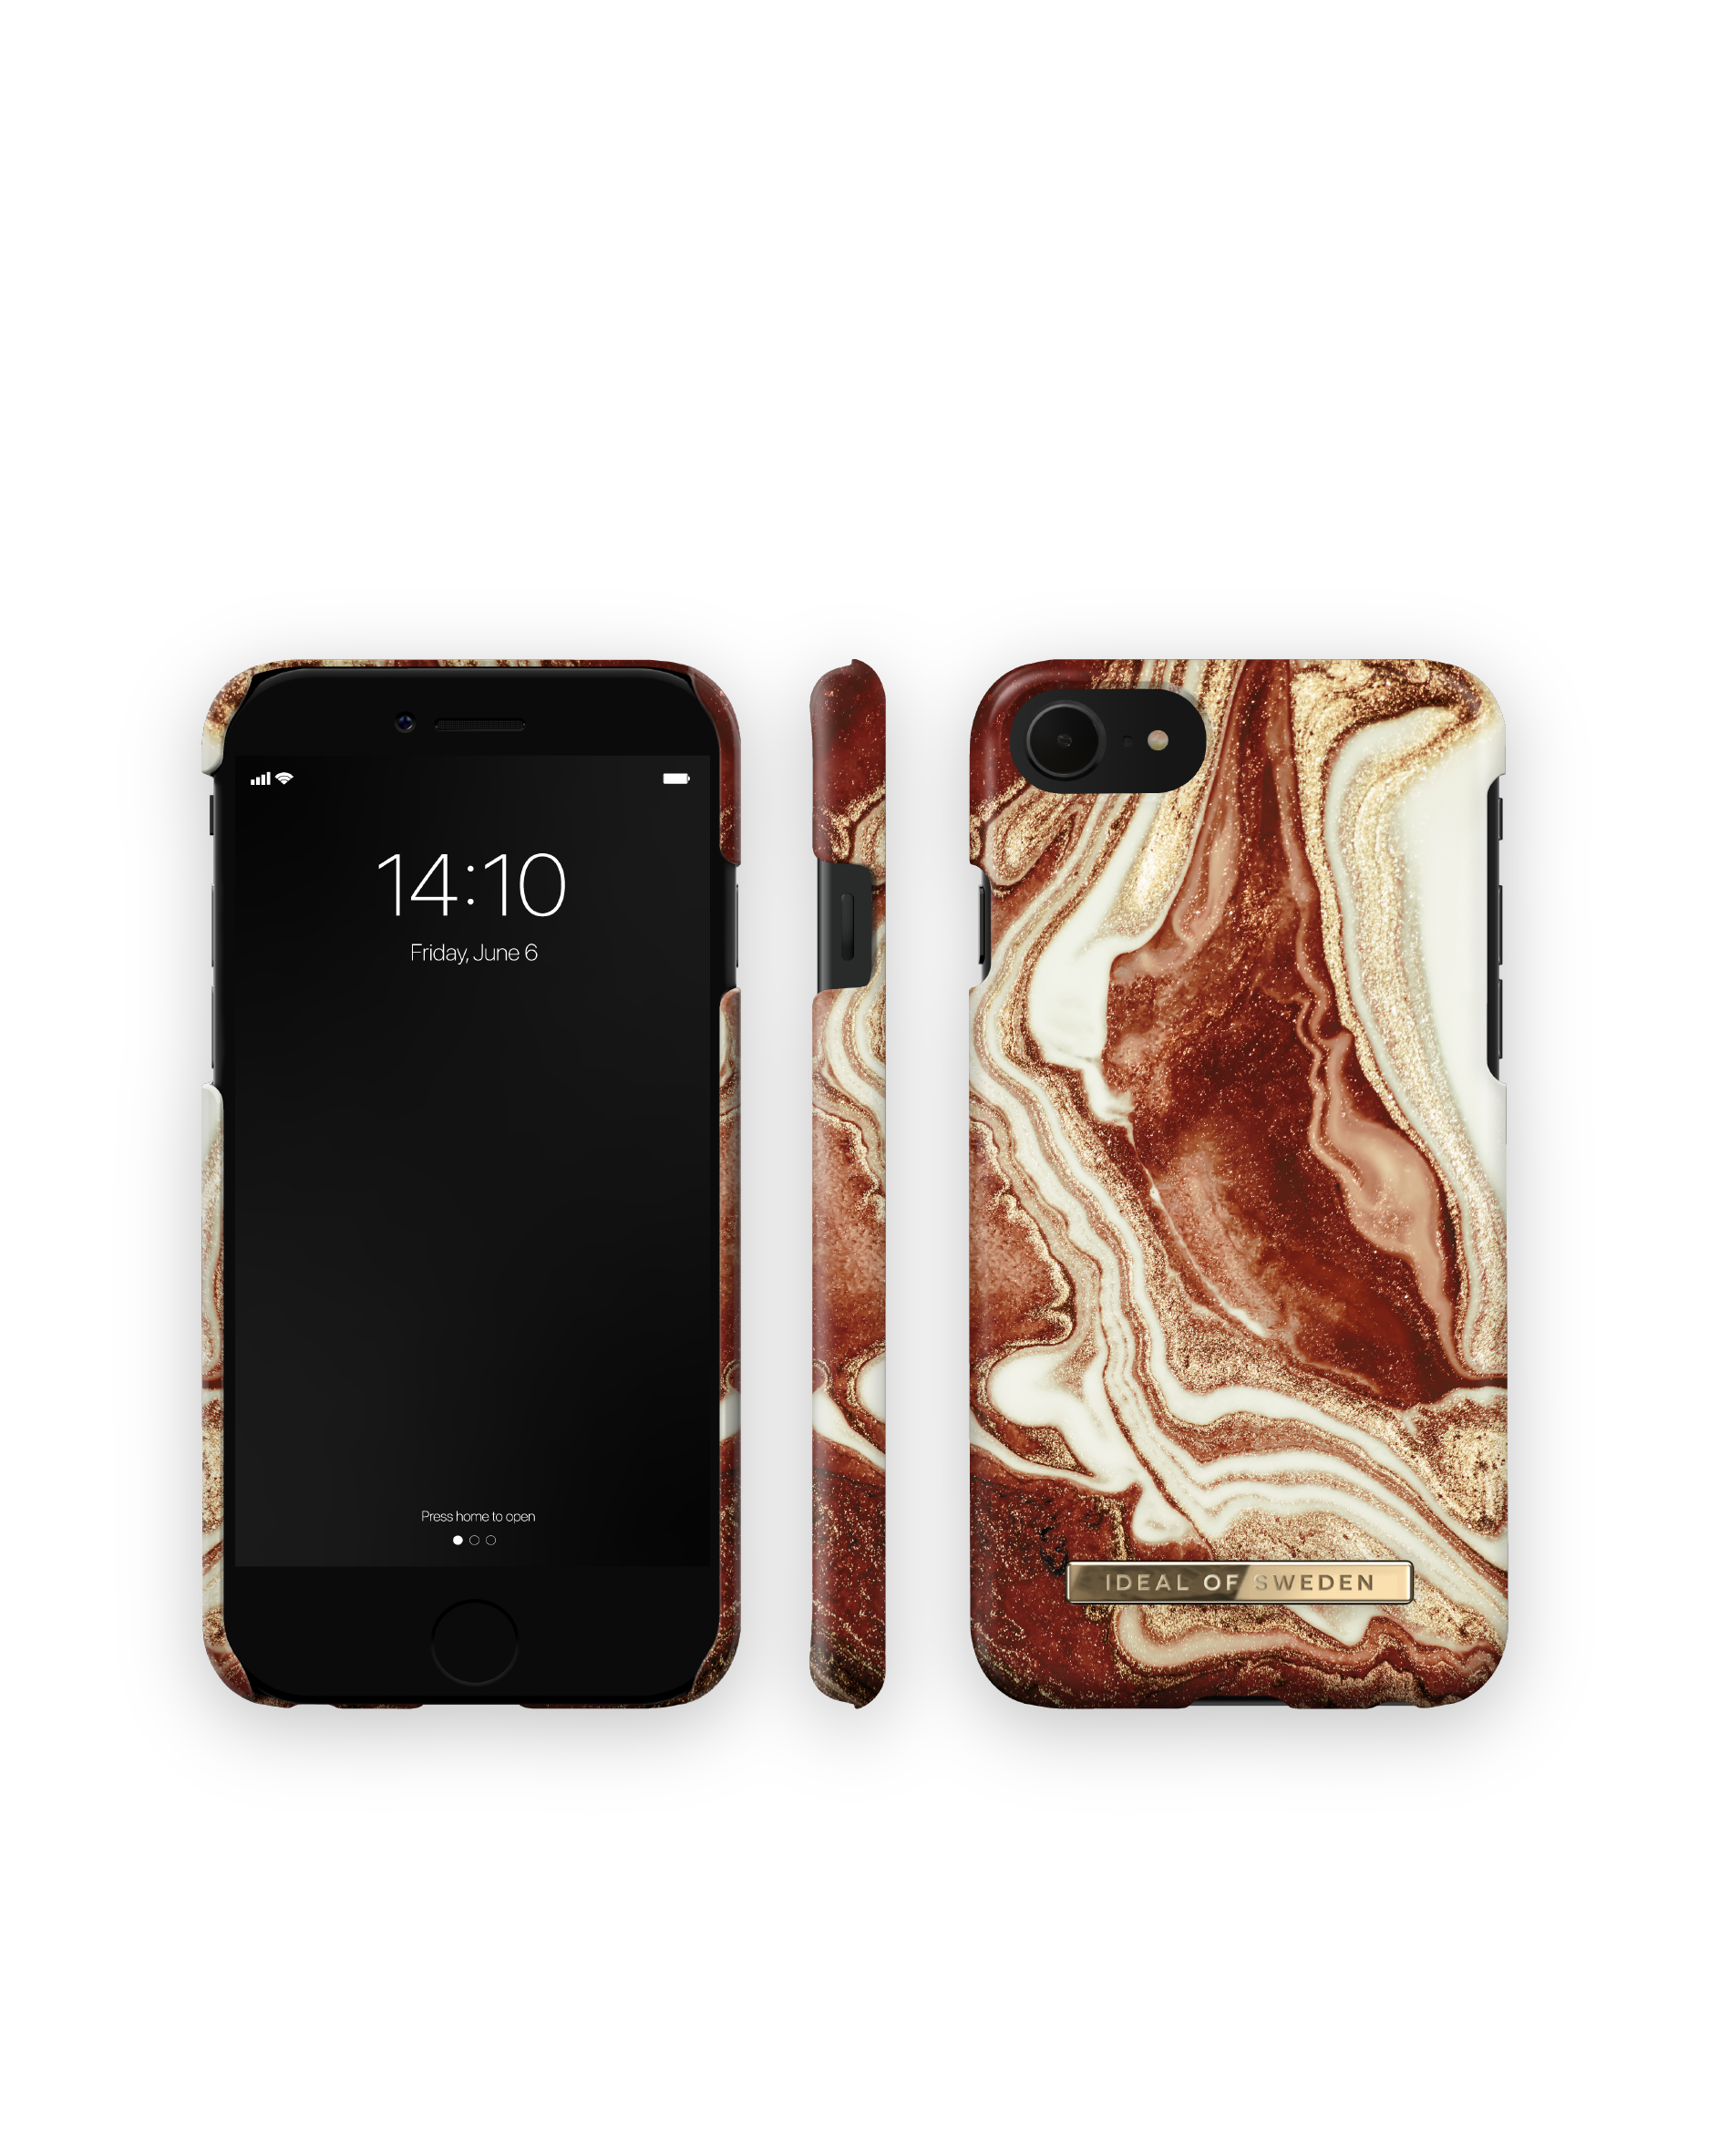 IDEAL OF SWEDEN SE Apple, Golden Backcover, Apple Apple iPhone Marble (2020), Rusty Apple IDFCGM19-I7, 8, iPhone iPhone 6(S), 7, Apple iPhone